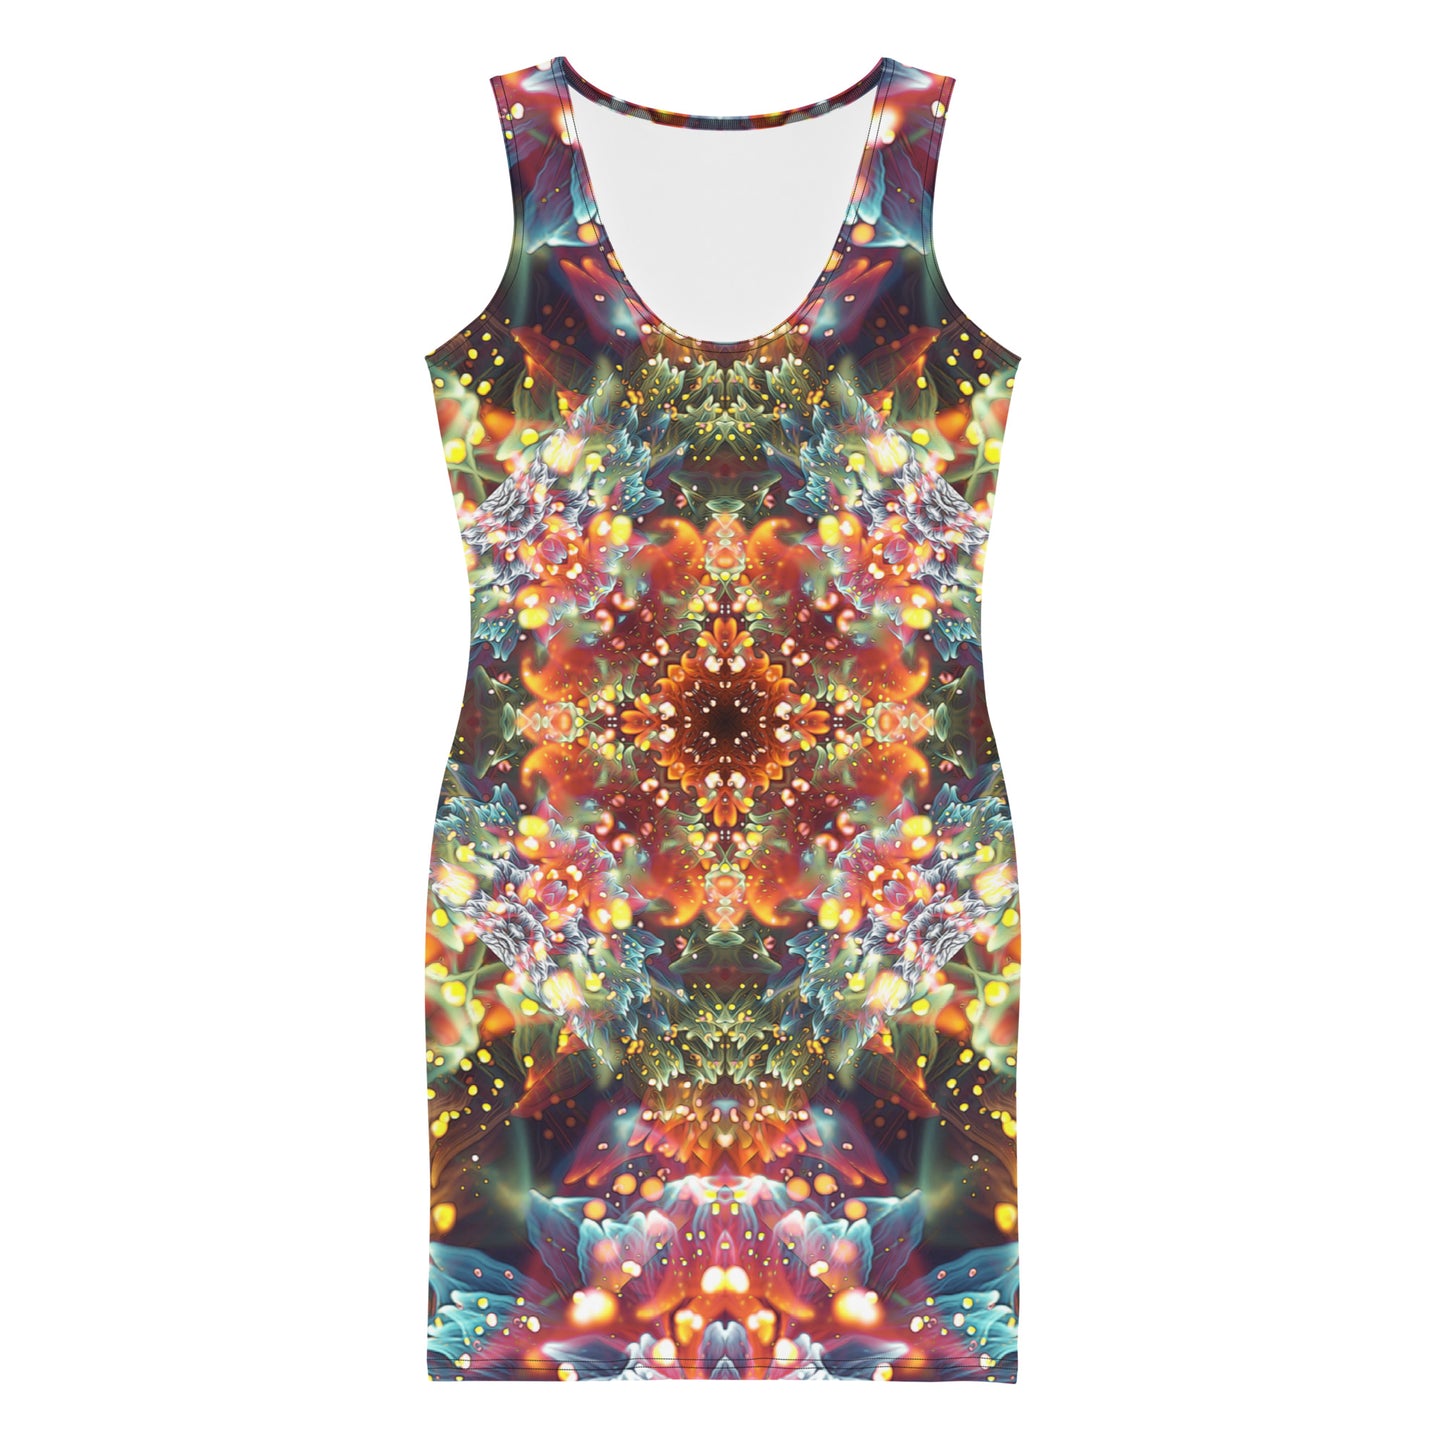 "Kaleidobloom" Bodycon FITTED DRESS